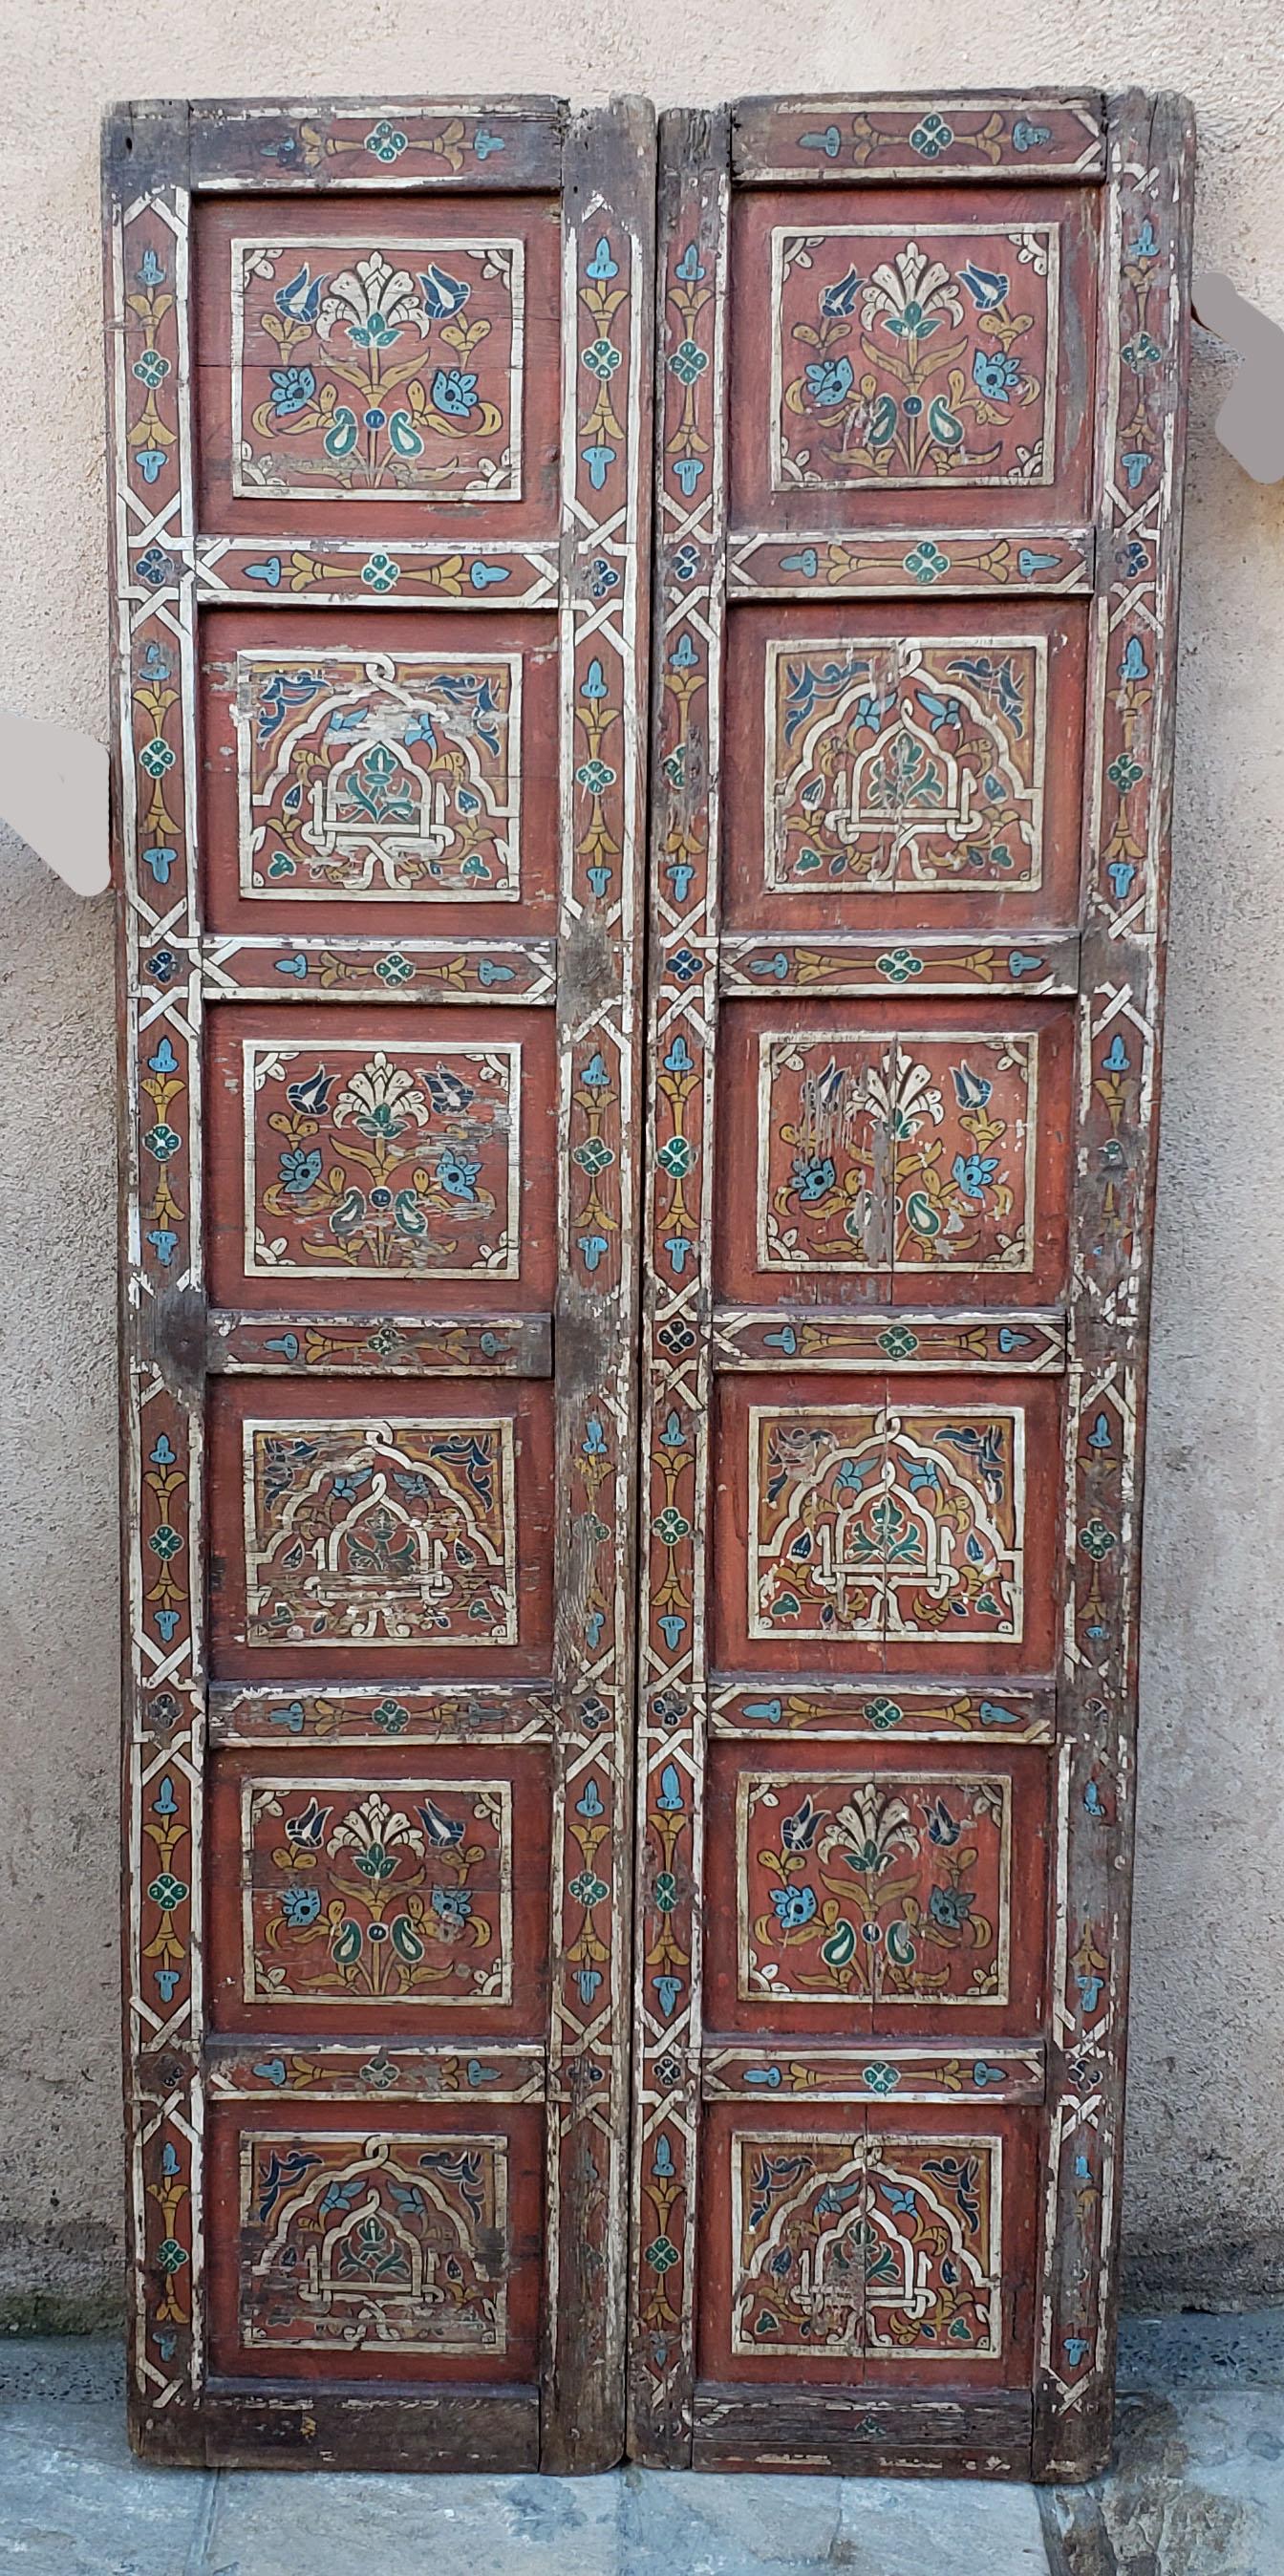 Another amazing double panel Moroccan door measuring approximately 72.5